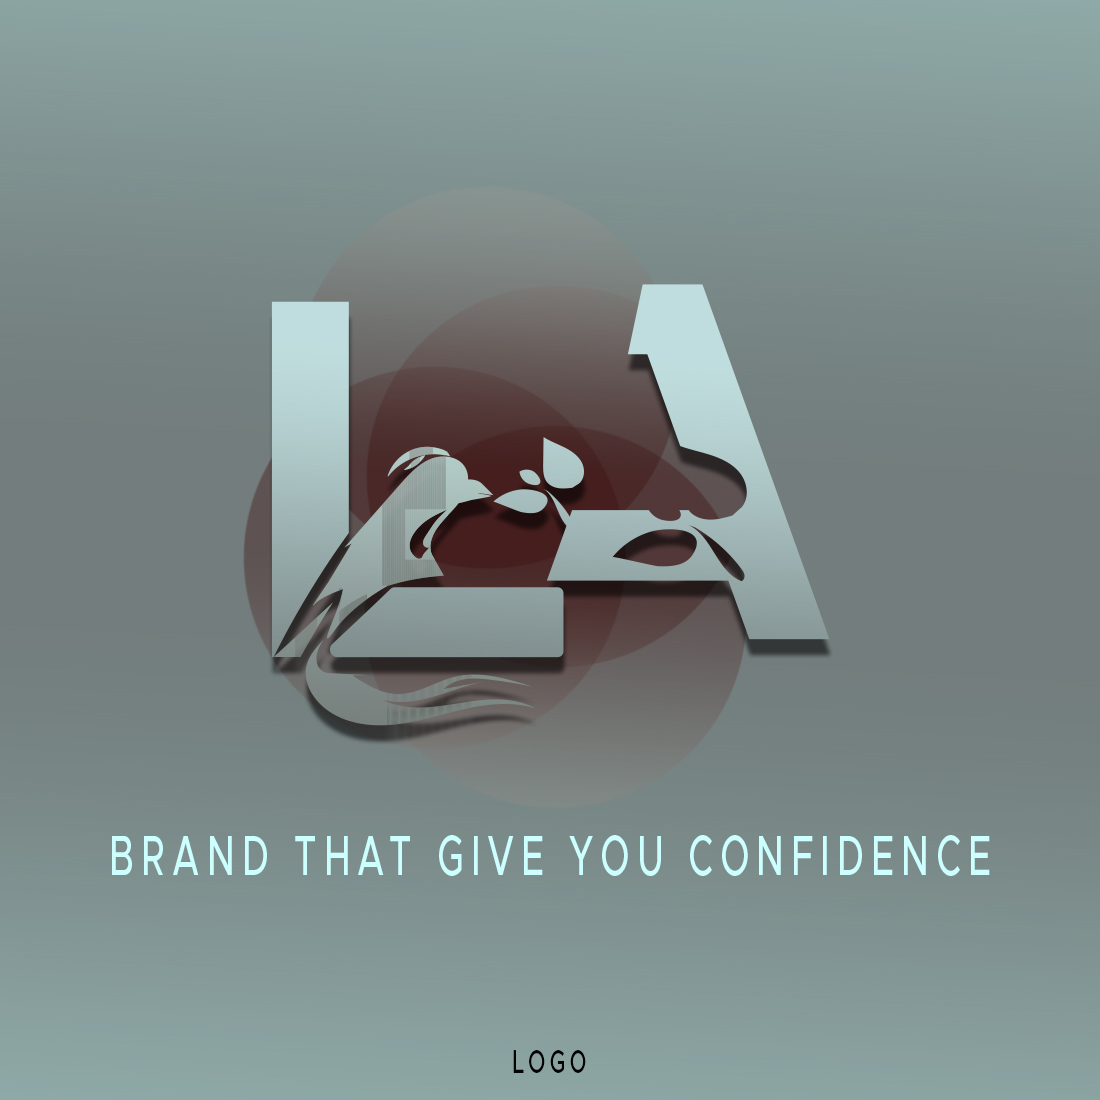 Logo for a brand that give you confidence.